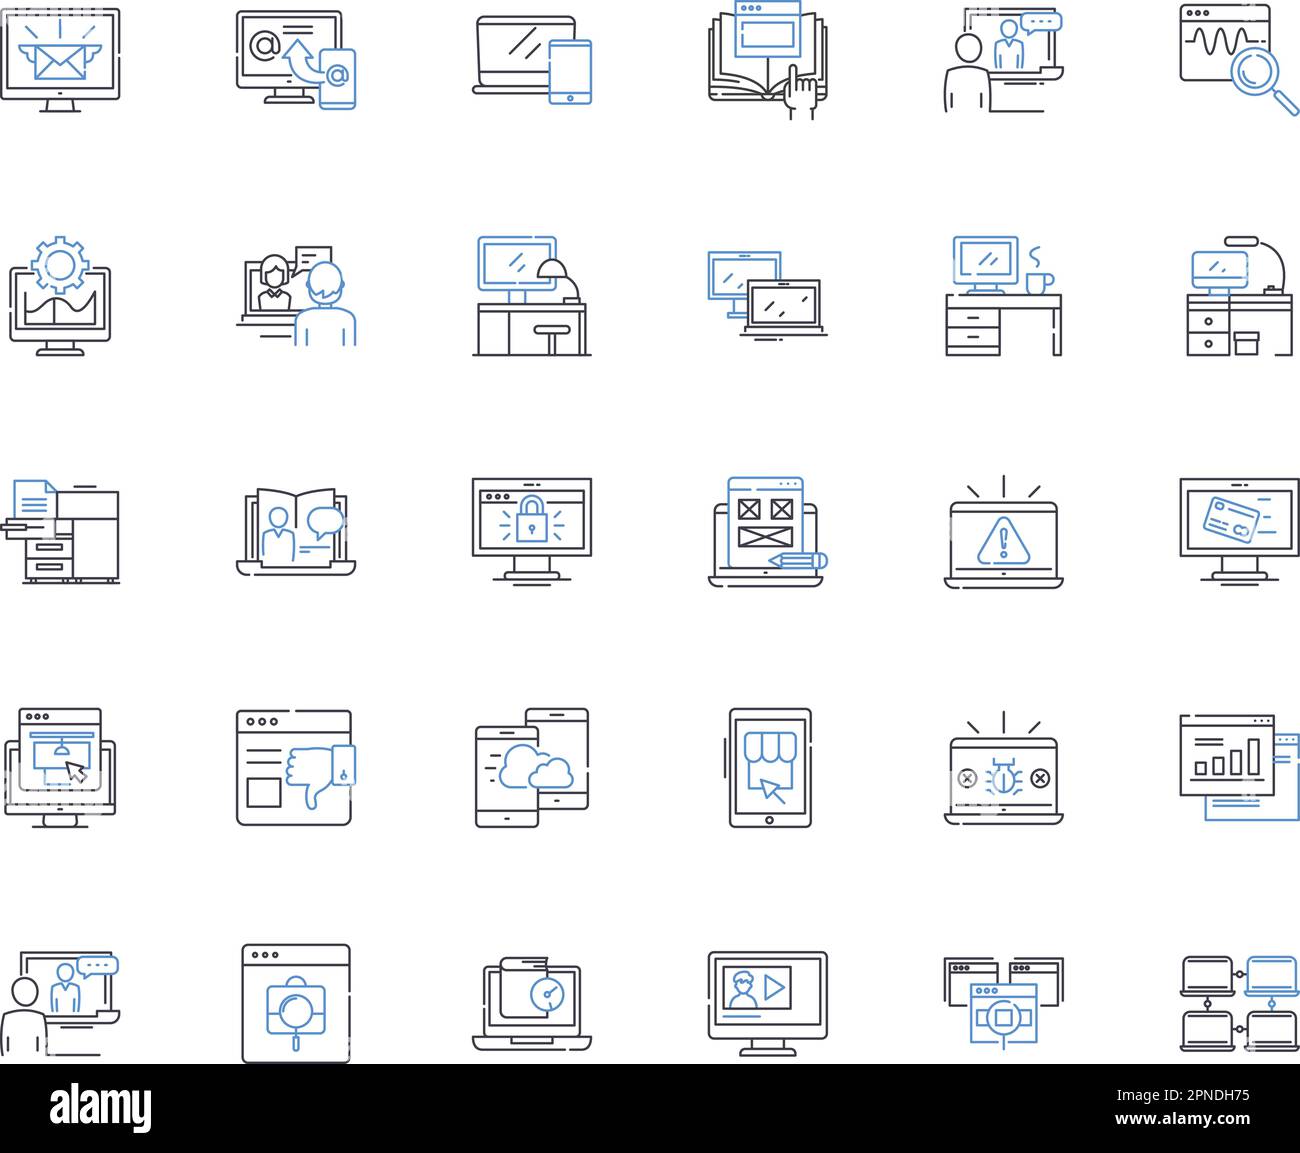 Processor line icons collection. Speed, Power, Performance, Efficiency, Overclocking, Architecture, Transistors vector and linear illustration Stock Vector